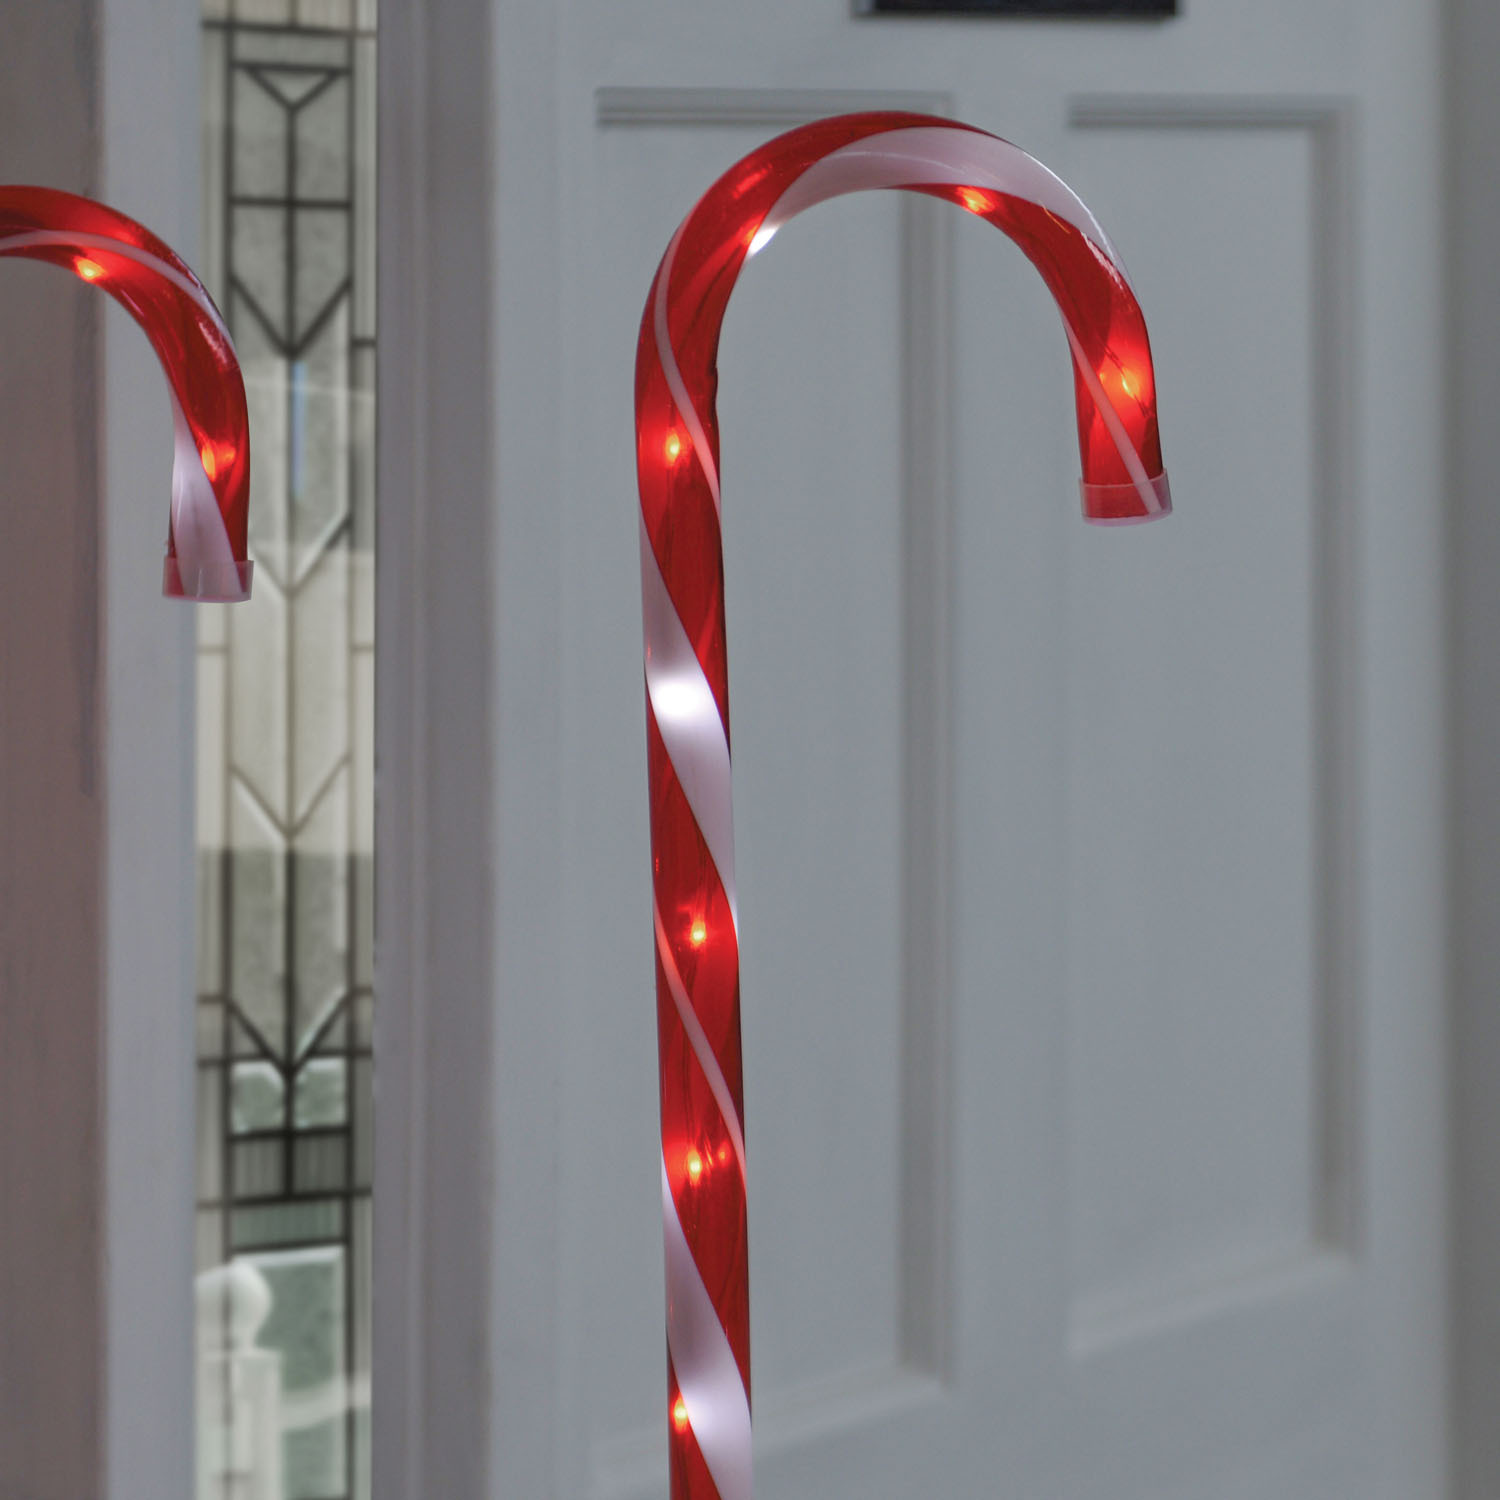 Set of 4 Candy Cane Lights - Red Image 2